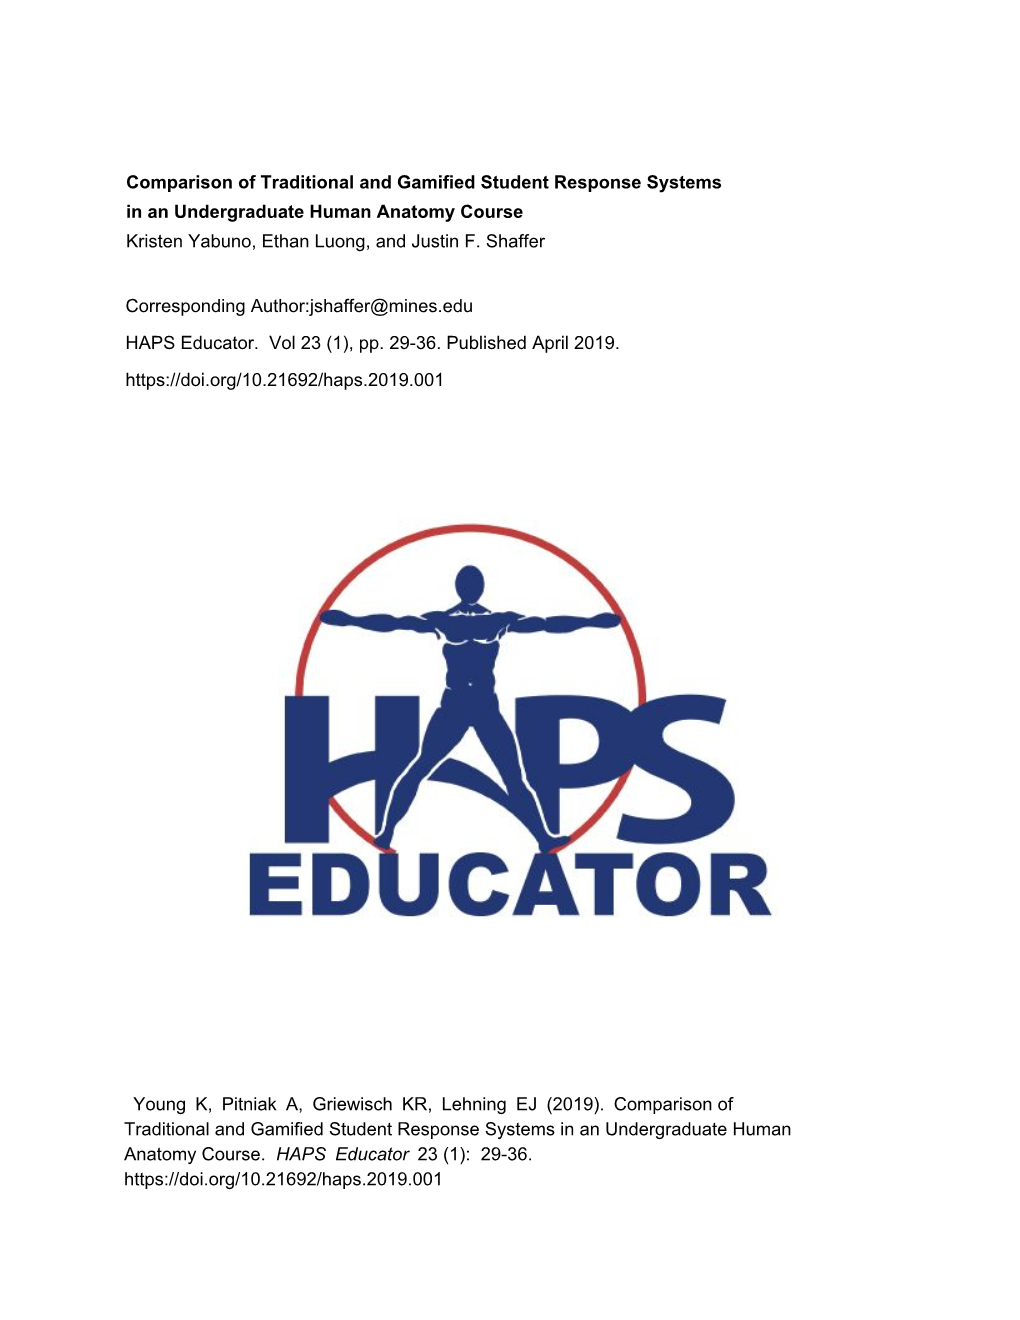 Comparison of Traditional and Gamified Student Response Systems in an Undergraduate Human Anatomy Course Kristen Yabuno, Ethan Luong, and Justin F